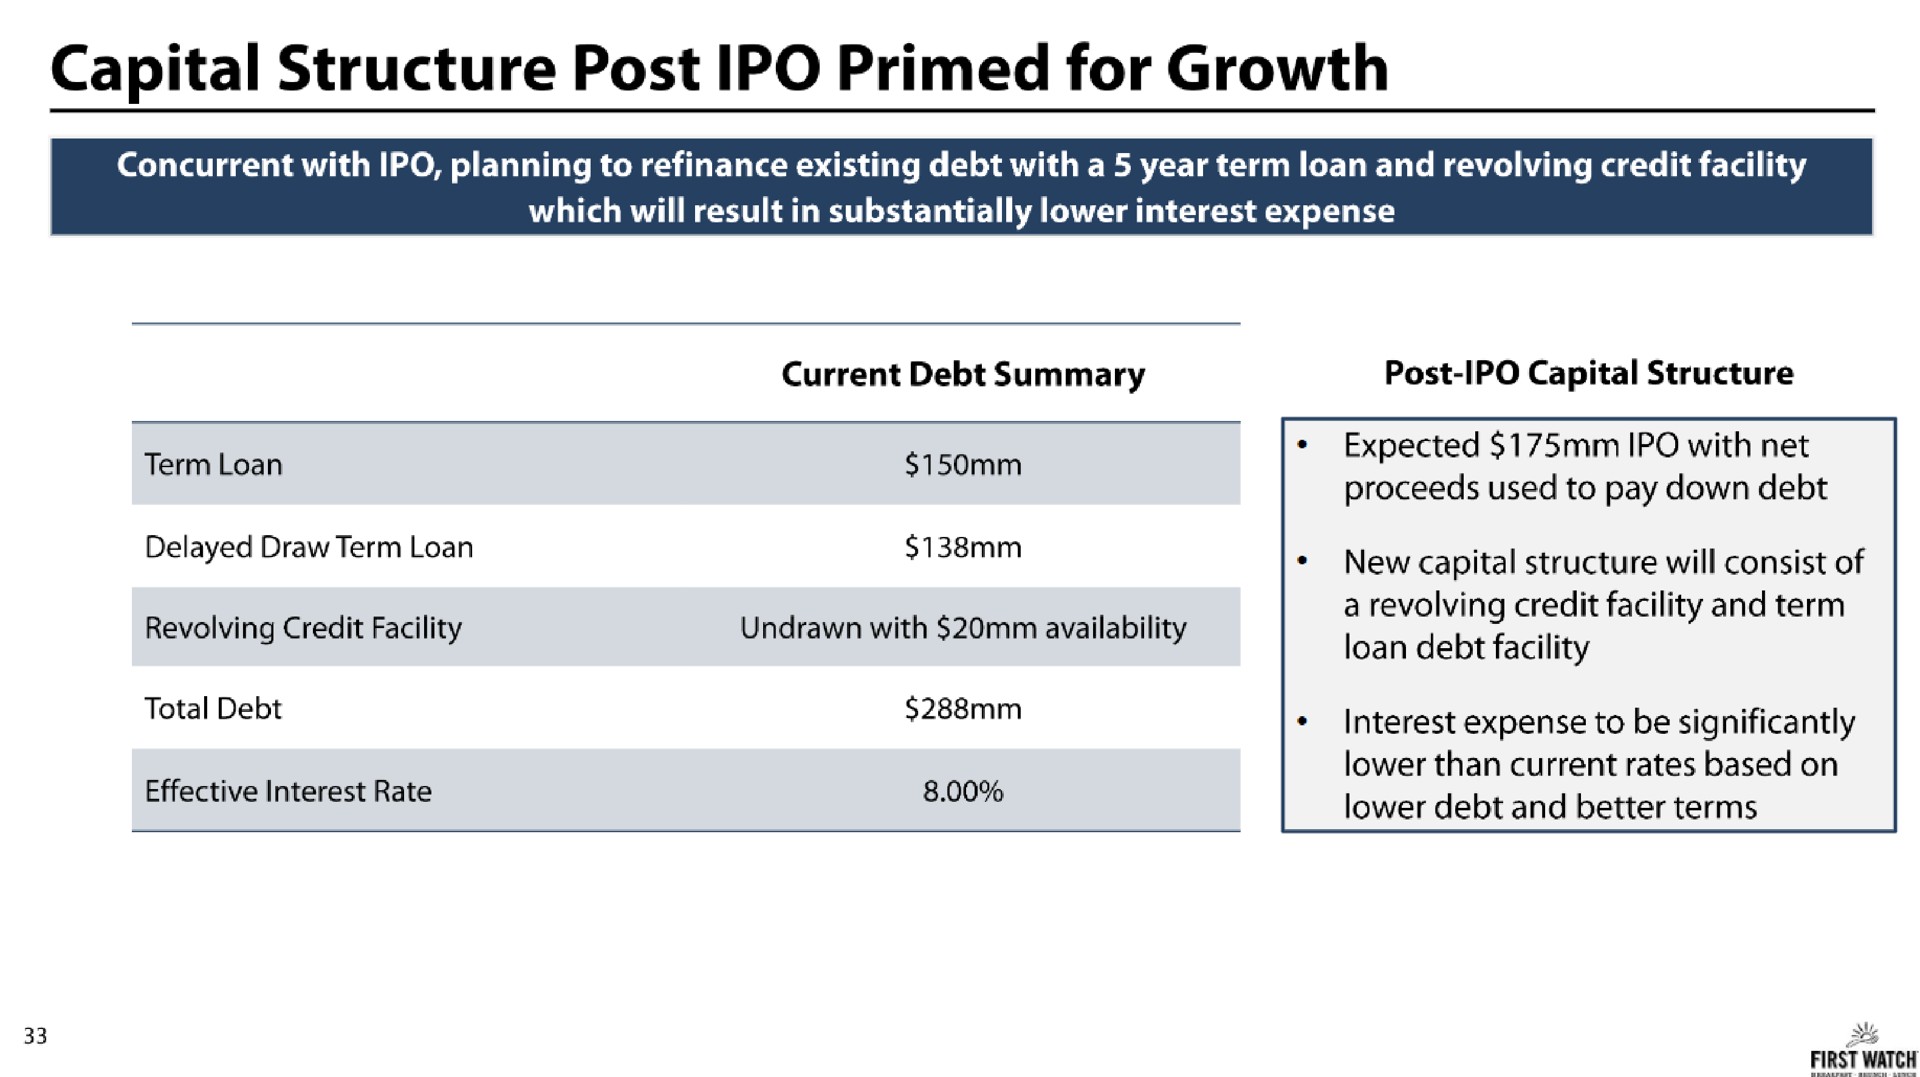 capital structure post primed for growth | First Watch